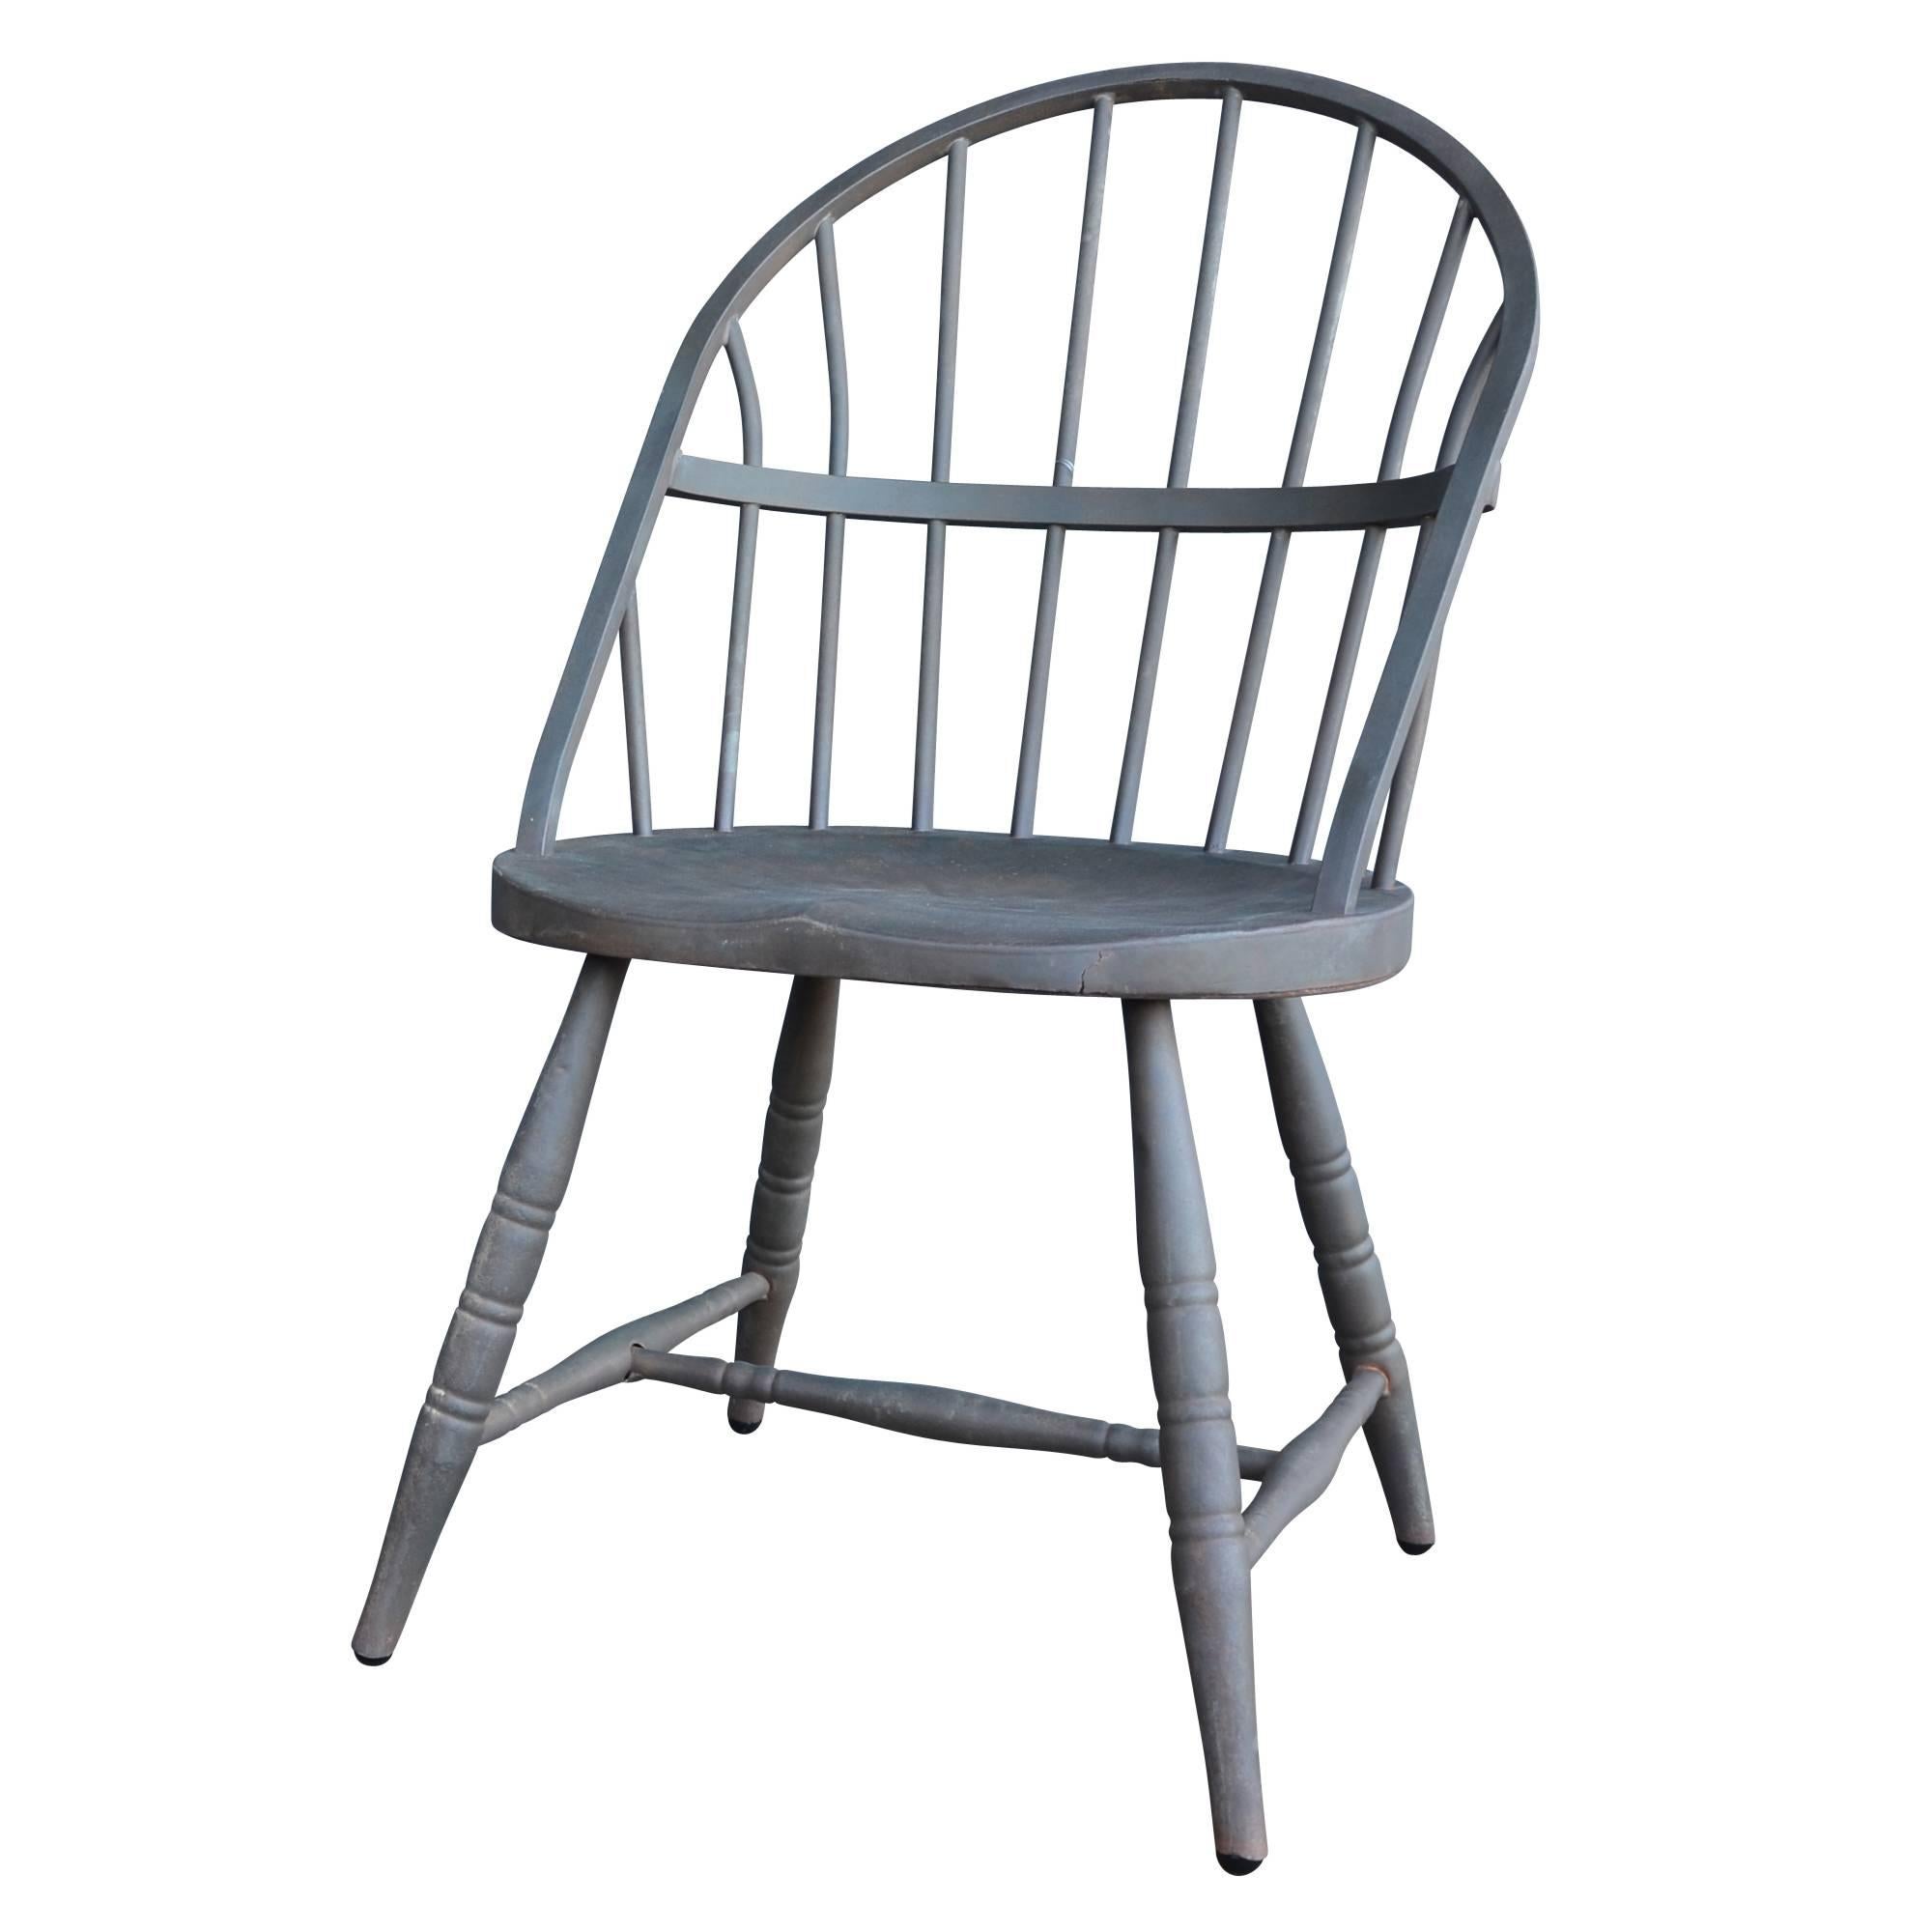 The windsor chair is a familiar and welcoming form, but this pair offers a new twist: they are made entirely of stamped and cast steel. Metal furnishings became a popular alternative to wood in the late 19th and early 20th centuries, first because